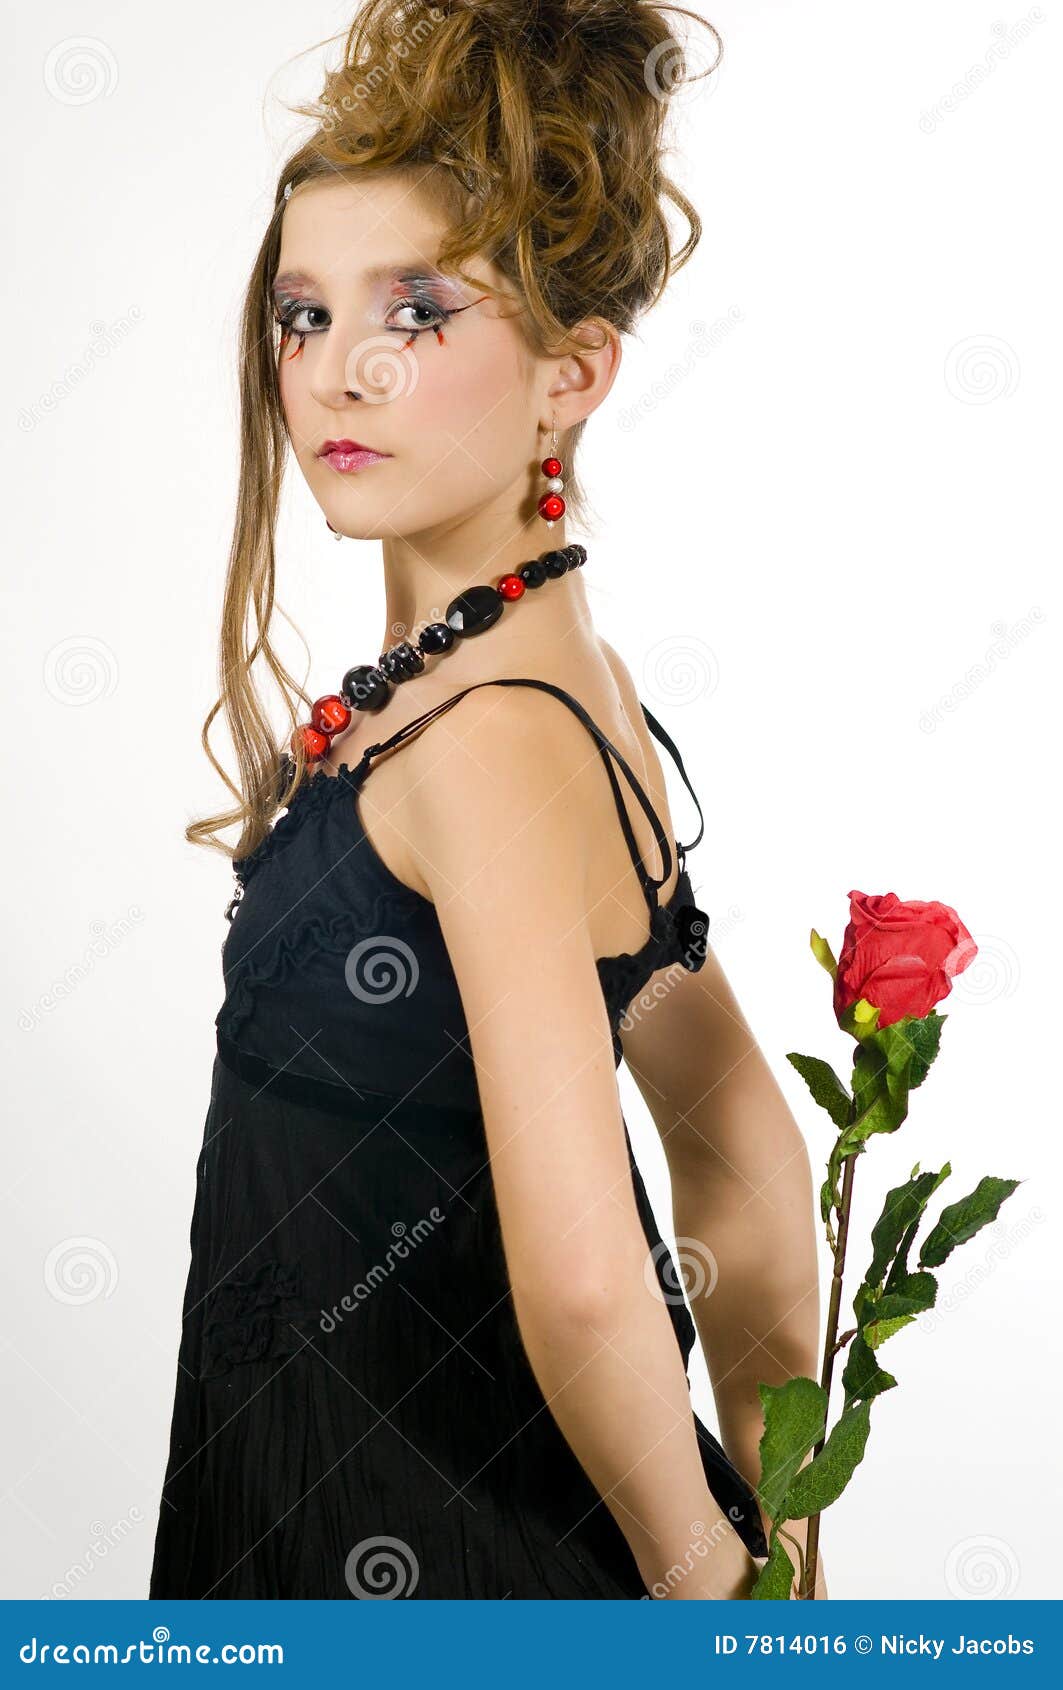 girl holding a red rose